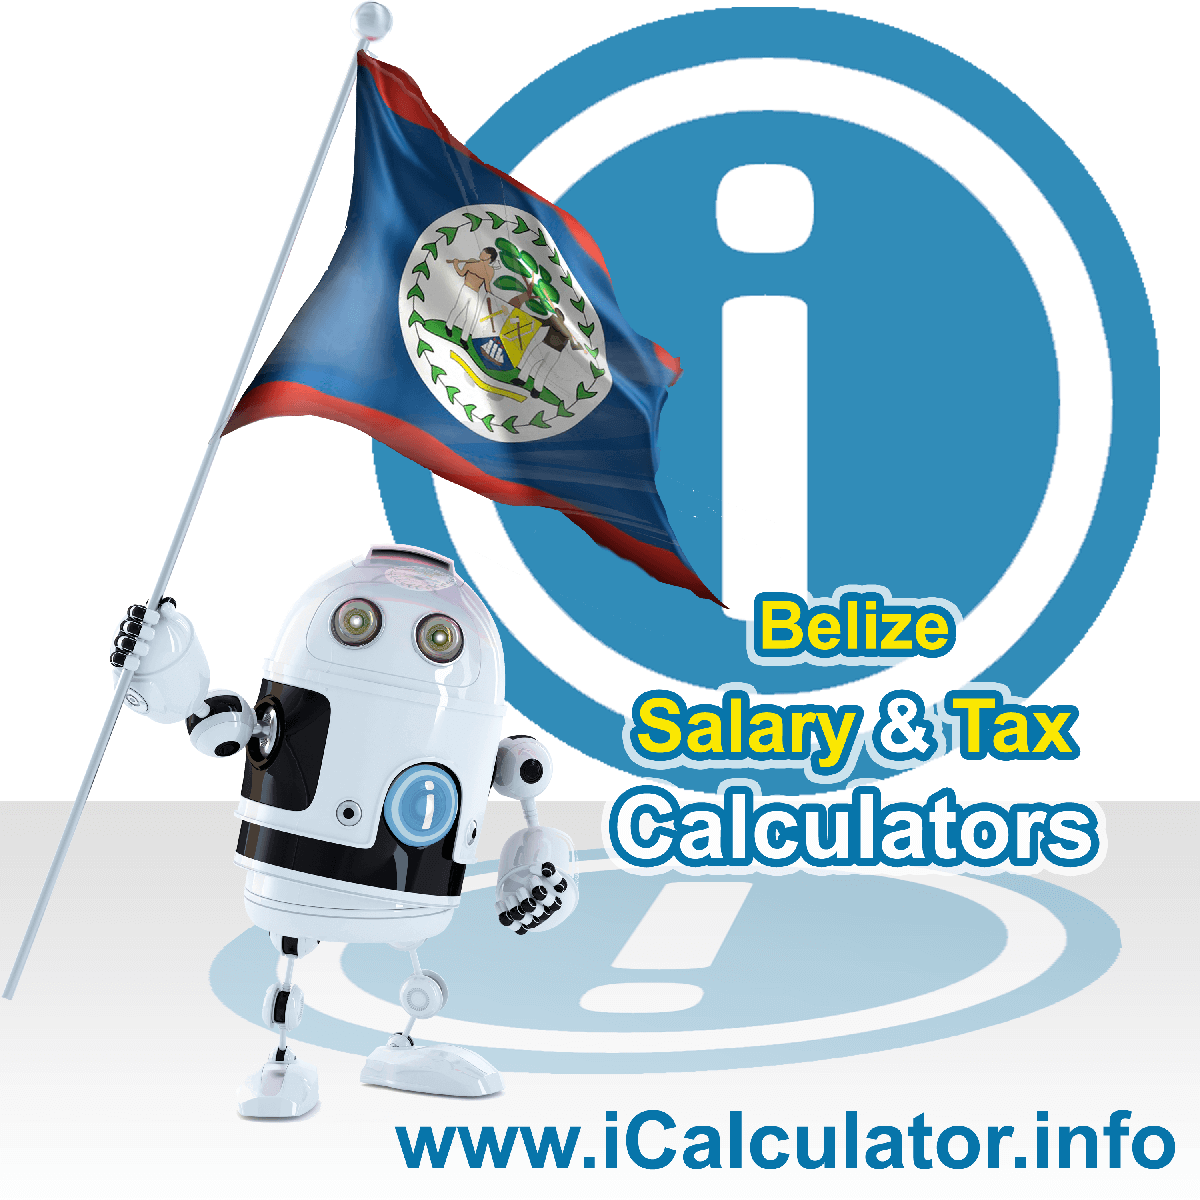 Belize Salary Calculator. This image shows the Belizeese flag and information relating to the tax formula for the Belize Tax Calculator